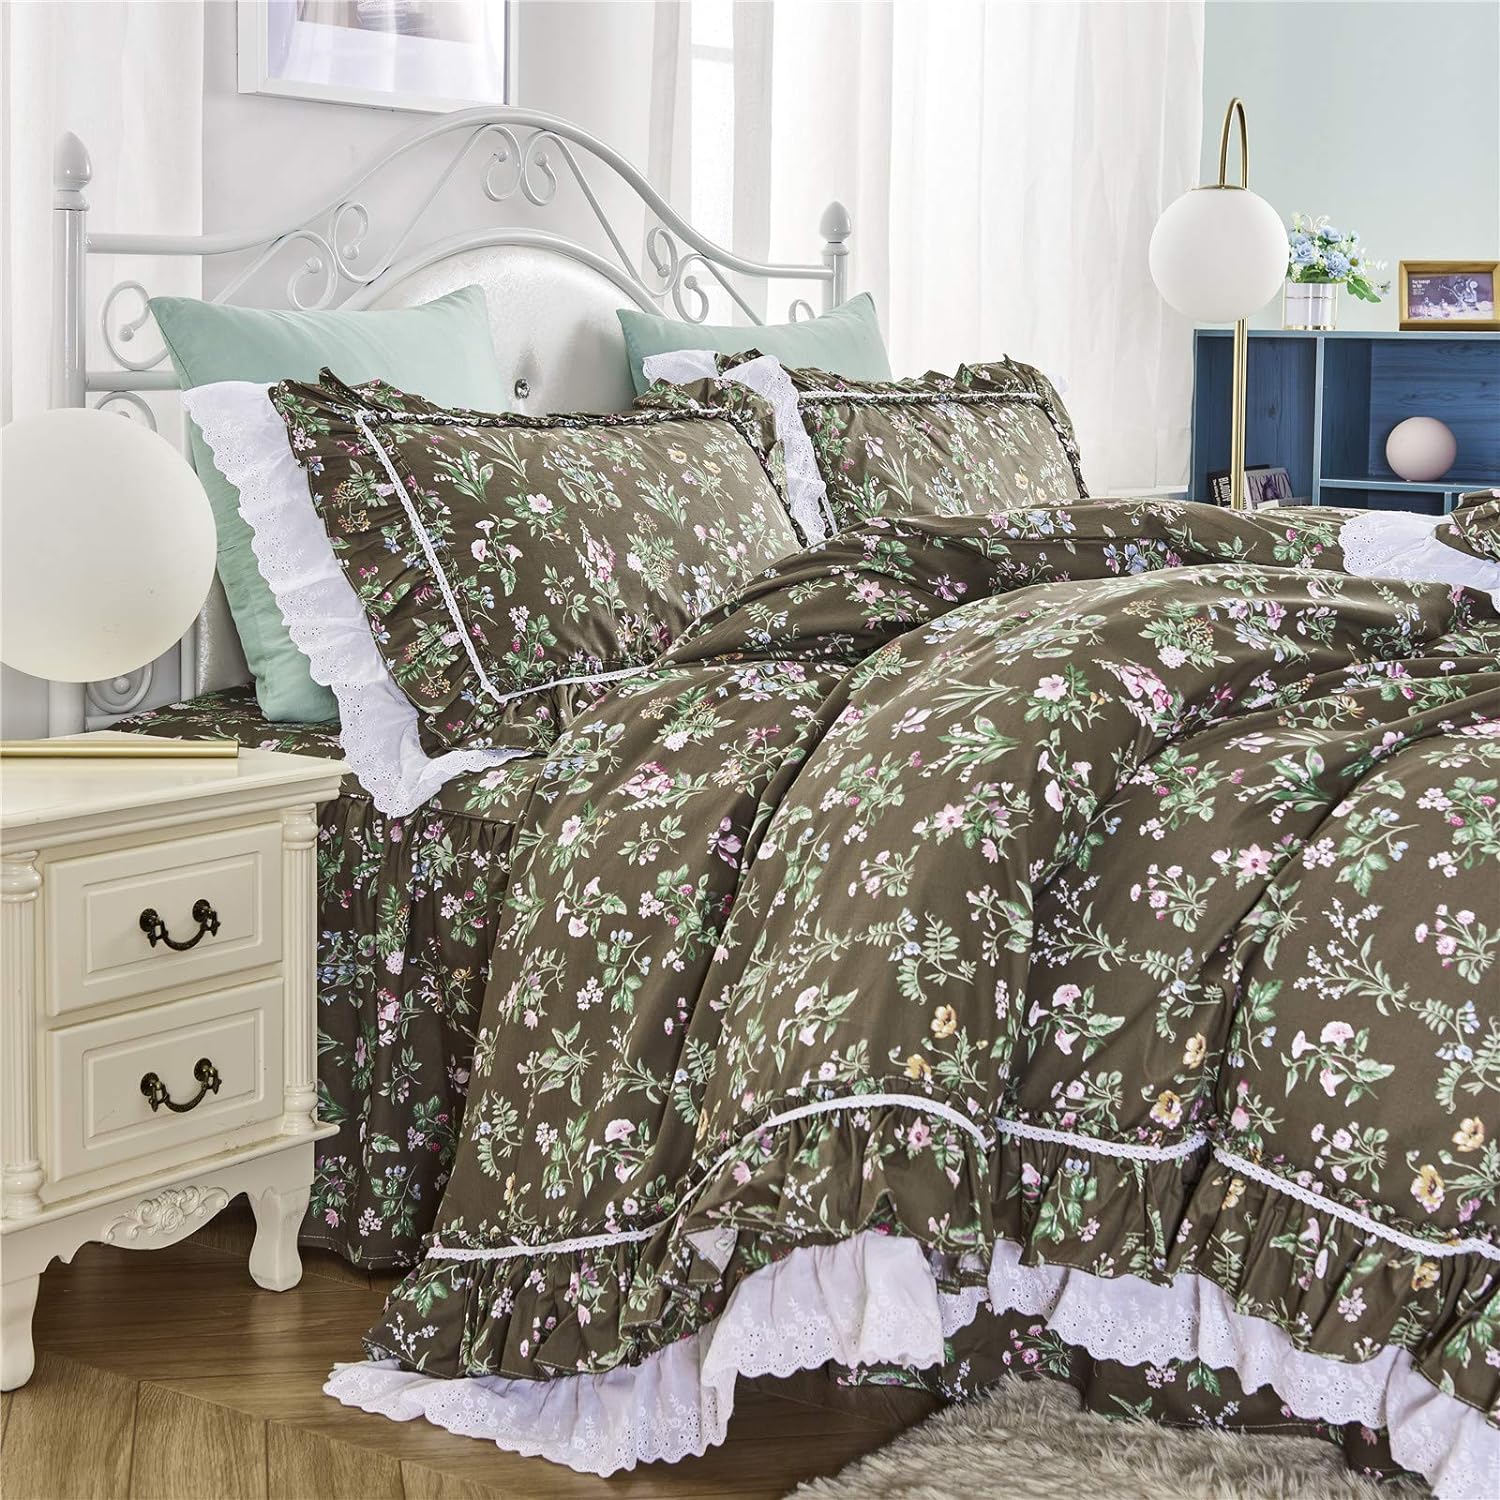 FADFAY Shabby Floral Dovet Cover Set Elegant and Vintage Farmhouse Bedding White Lace and Ruffle Princess Girls Bedding 100% Cotton Super Soft Korean Bedding with Bedskirt, Full Size